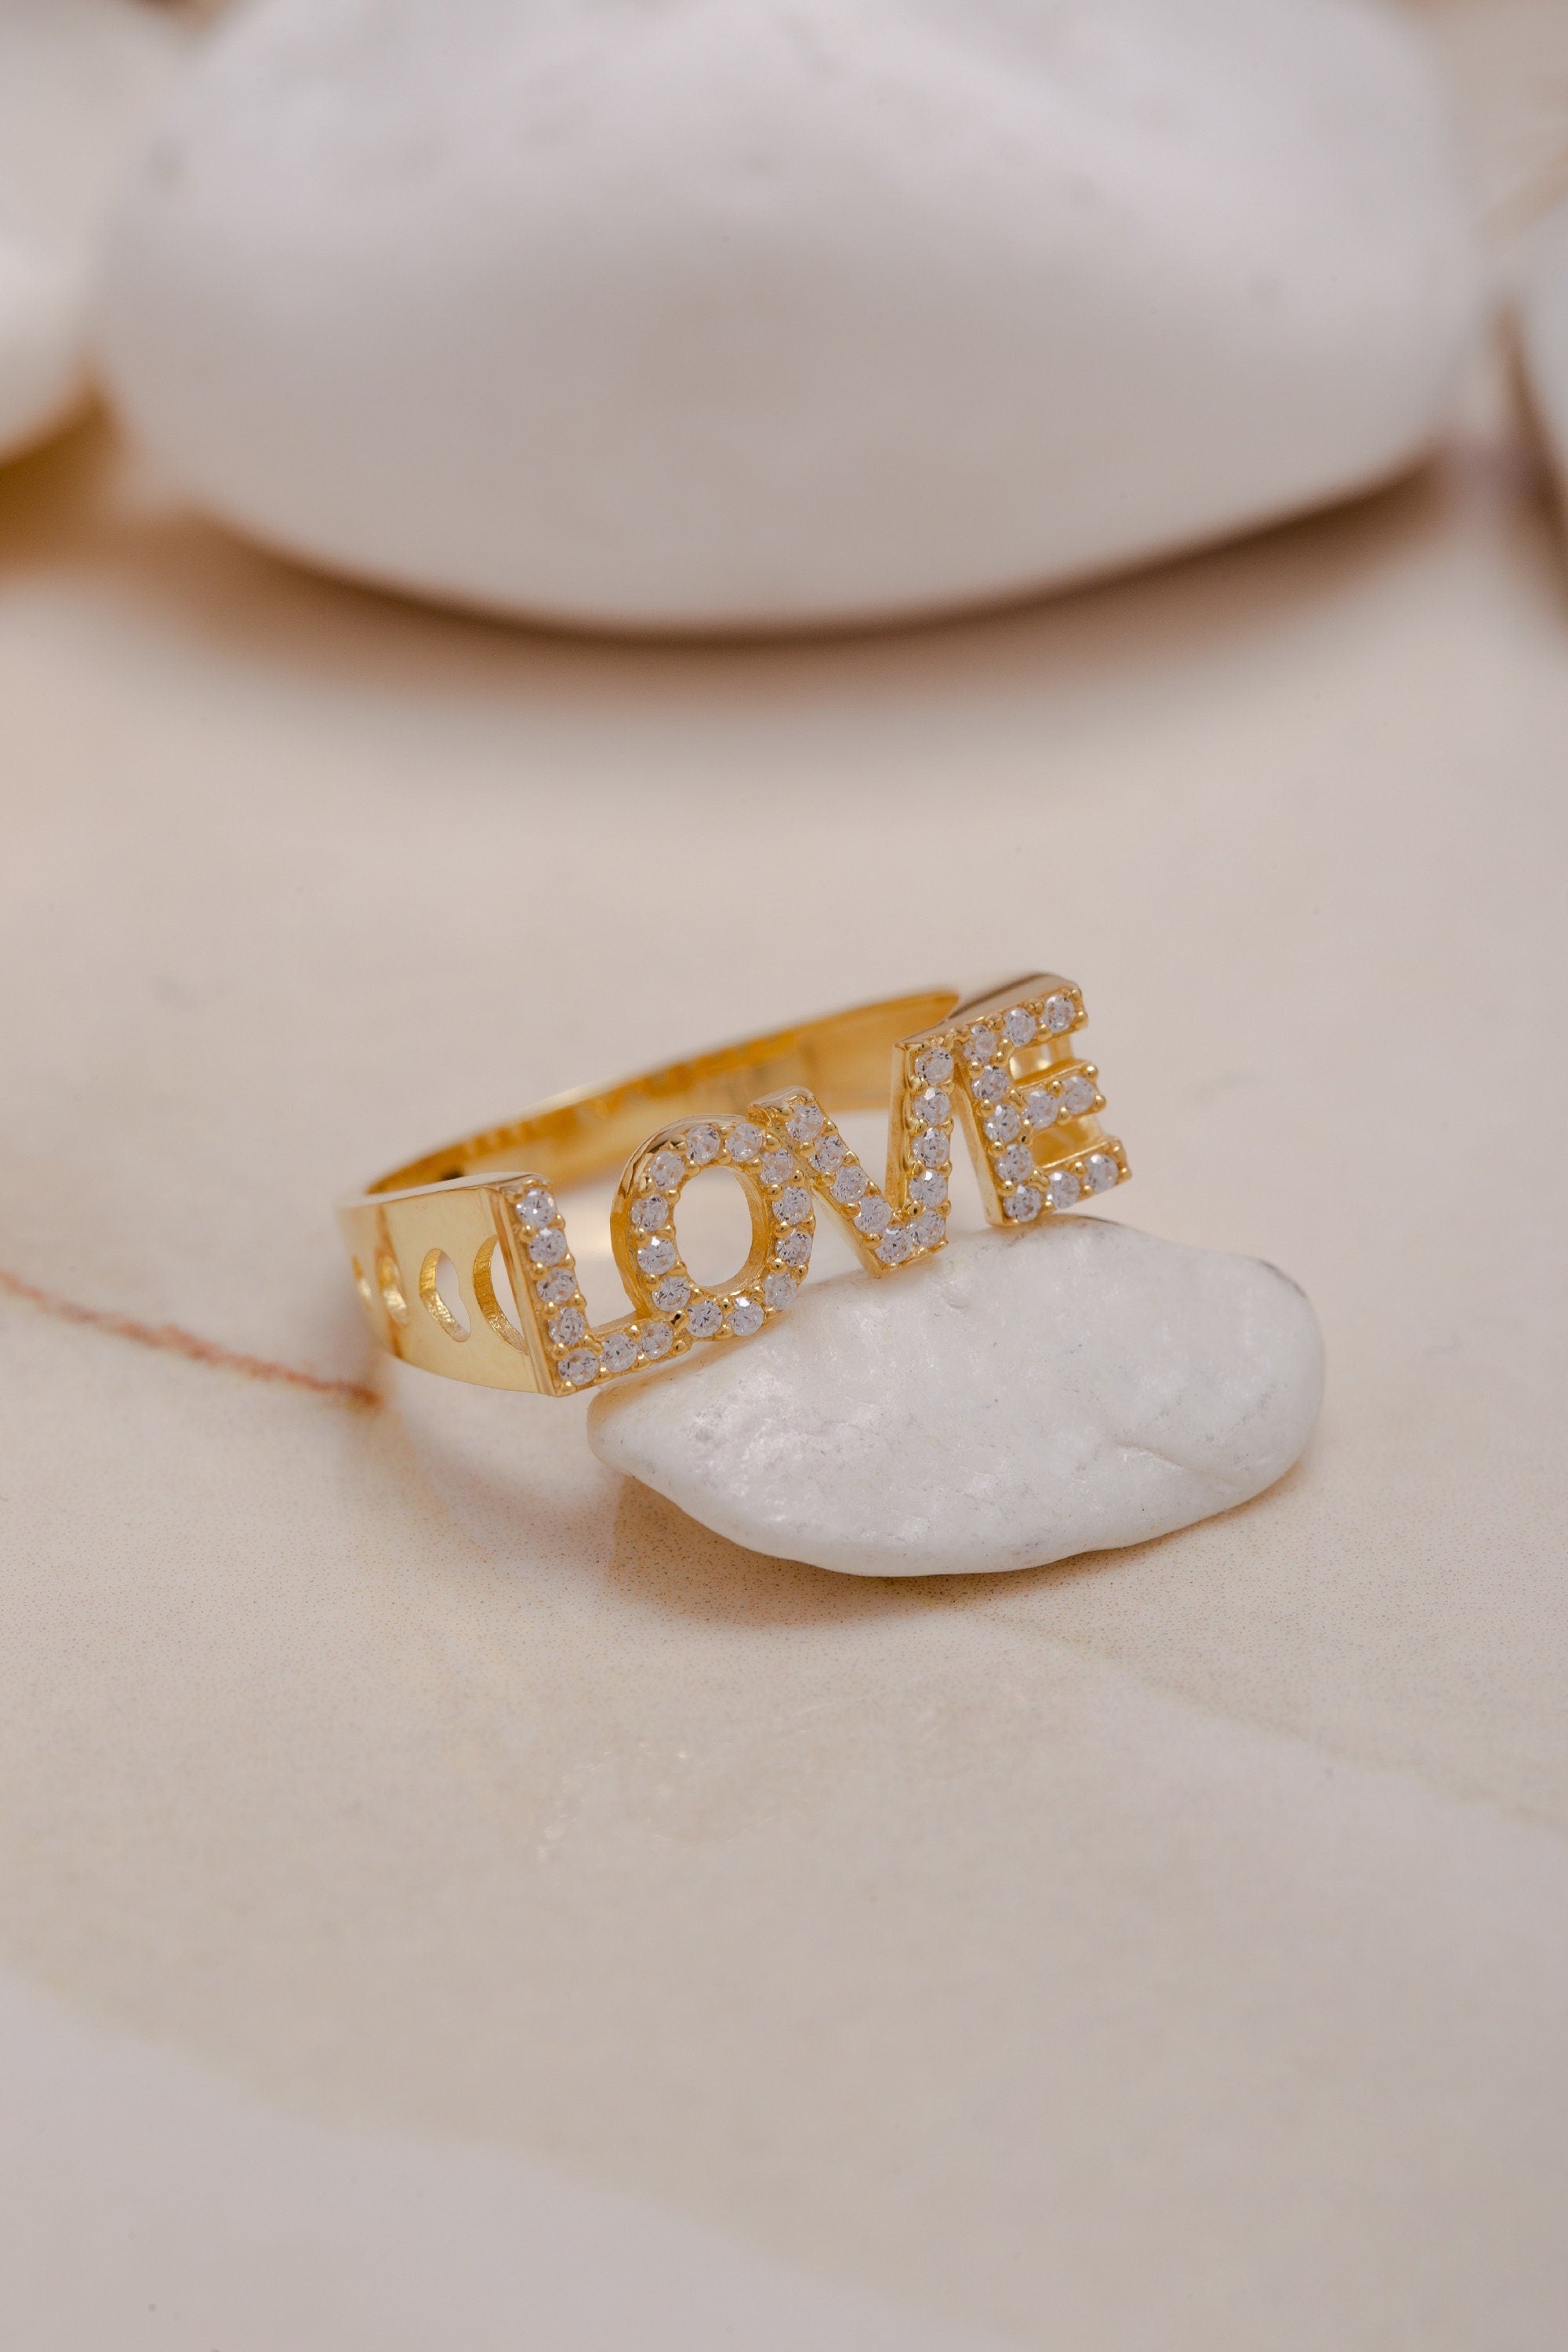 14K Solid Love Word Ring, 925 Silver Delicate Love Ring, Dainty Gold Ring, Gift, Gift For Mother Day, Mother Day Jewelry, Gift for Her